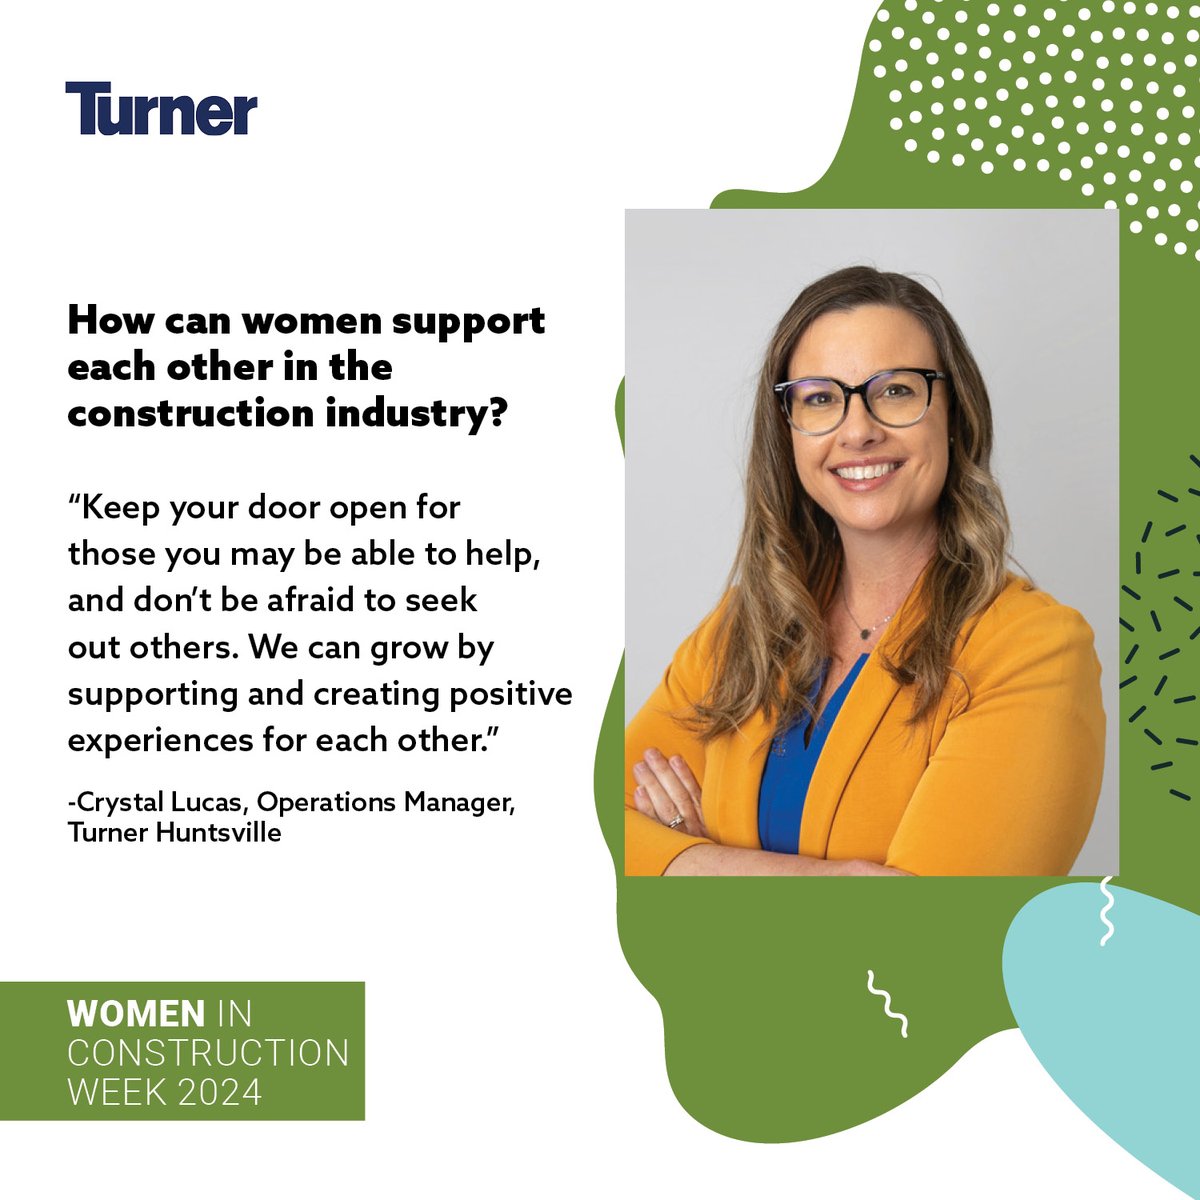 For #wicweek24, we asked a few Mid-South team members about keys to continued growth in the industry. Crystal Lucas, operations manager in #Huntsville, discussed how women can support each other. #TurnerConstruction #womeninconstruction #keystothefuture #womenintrades